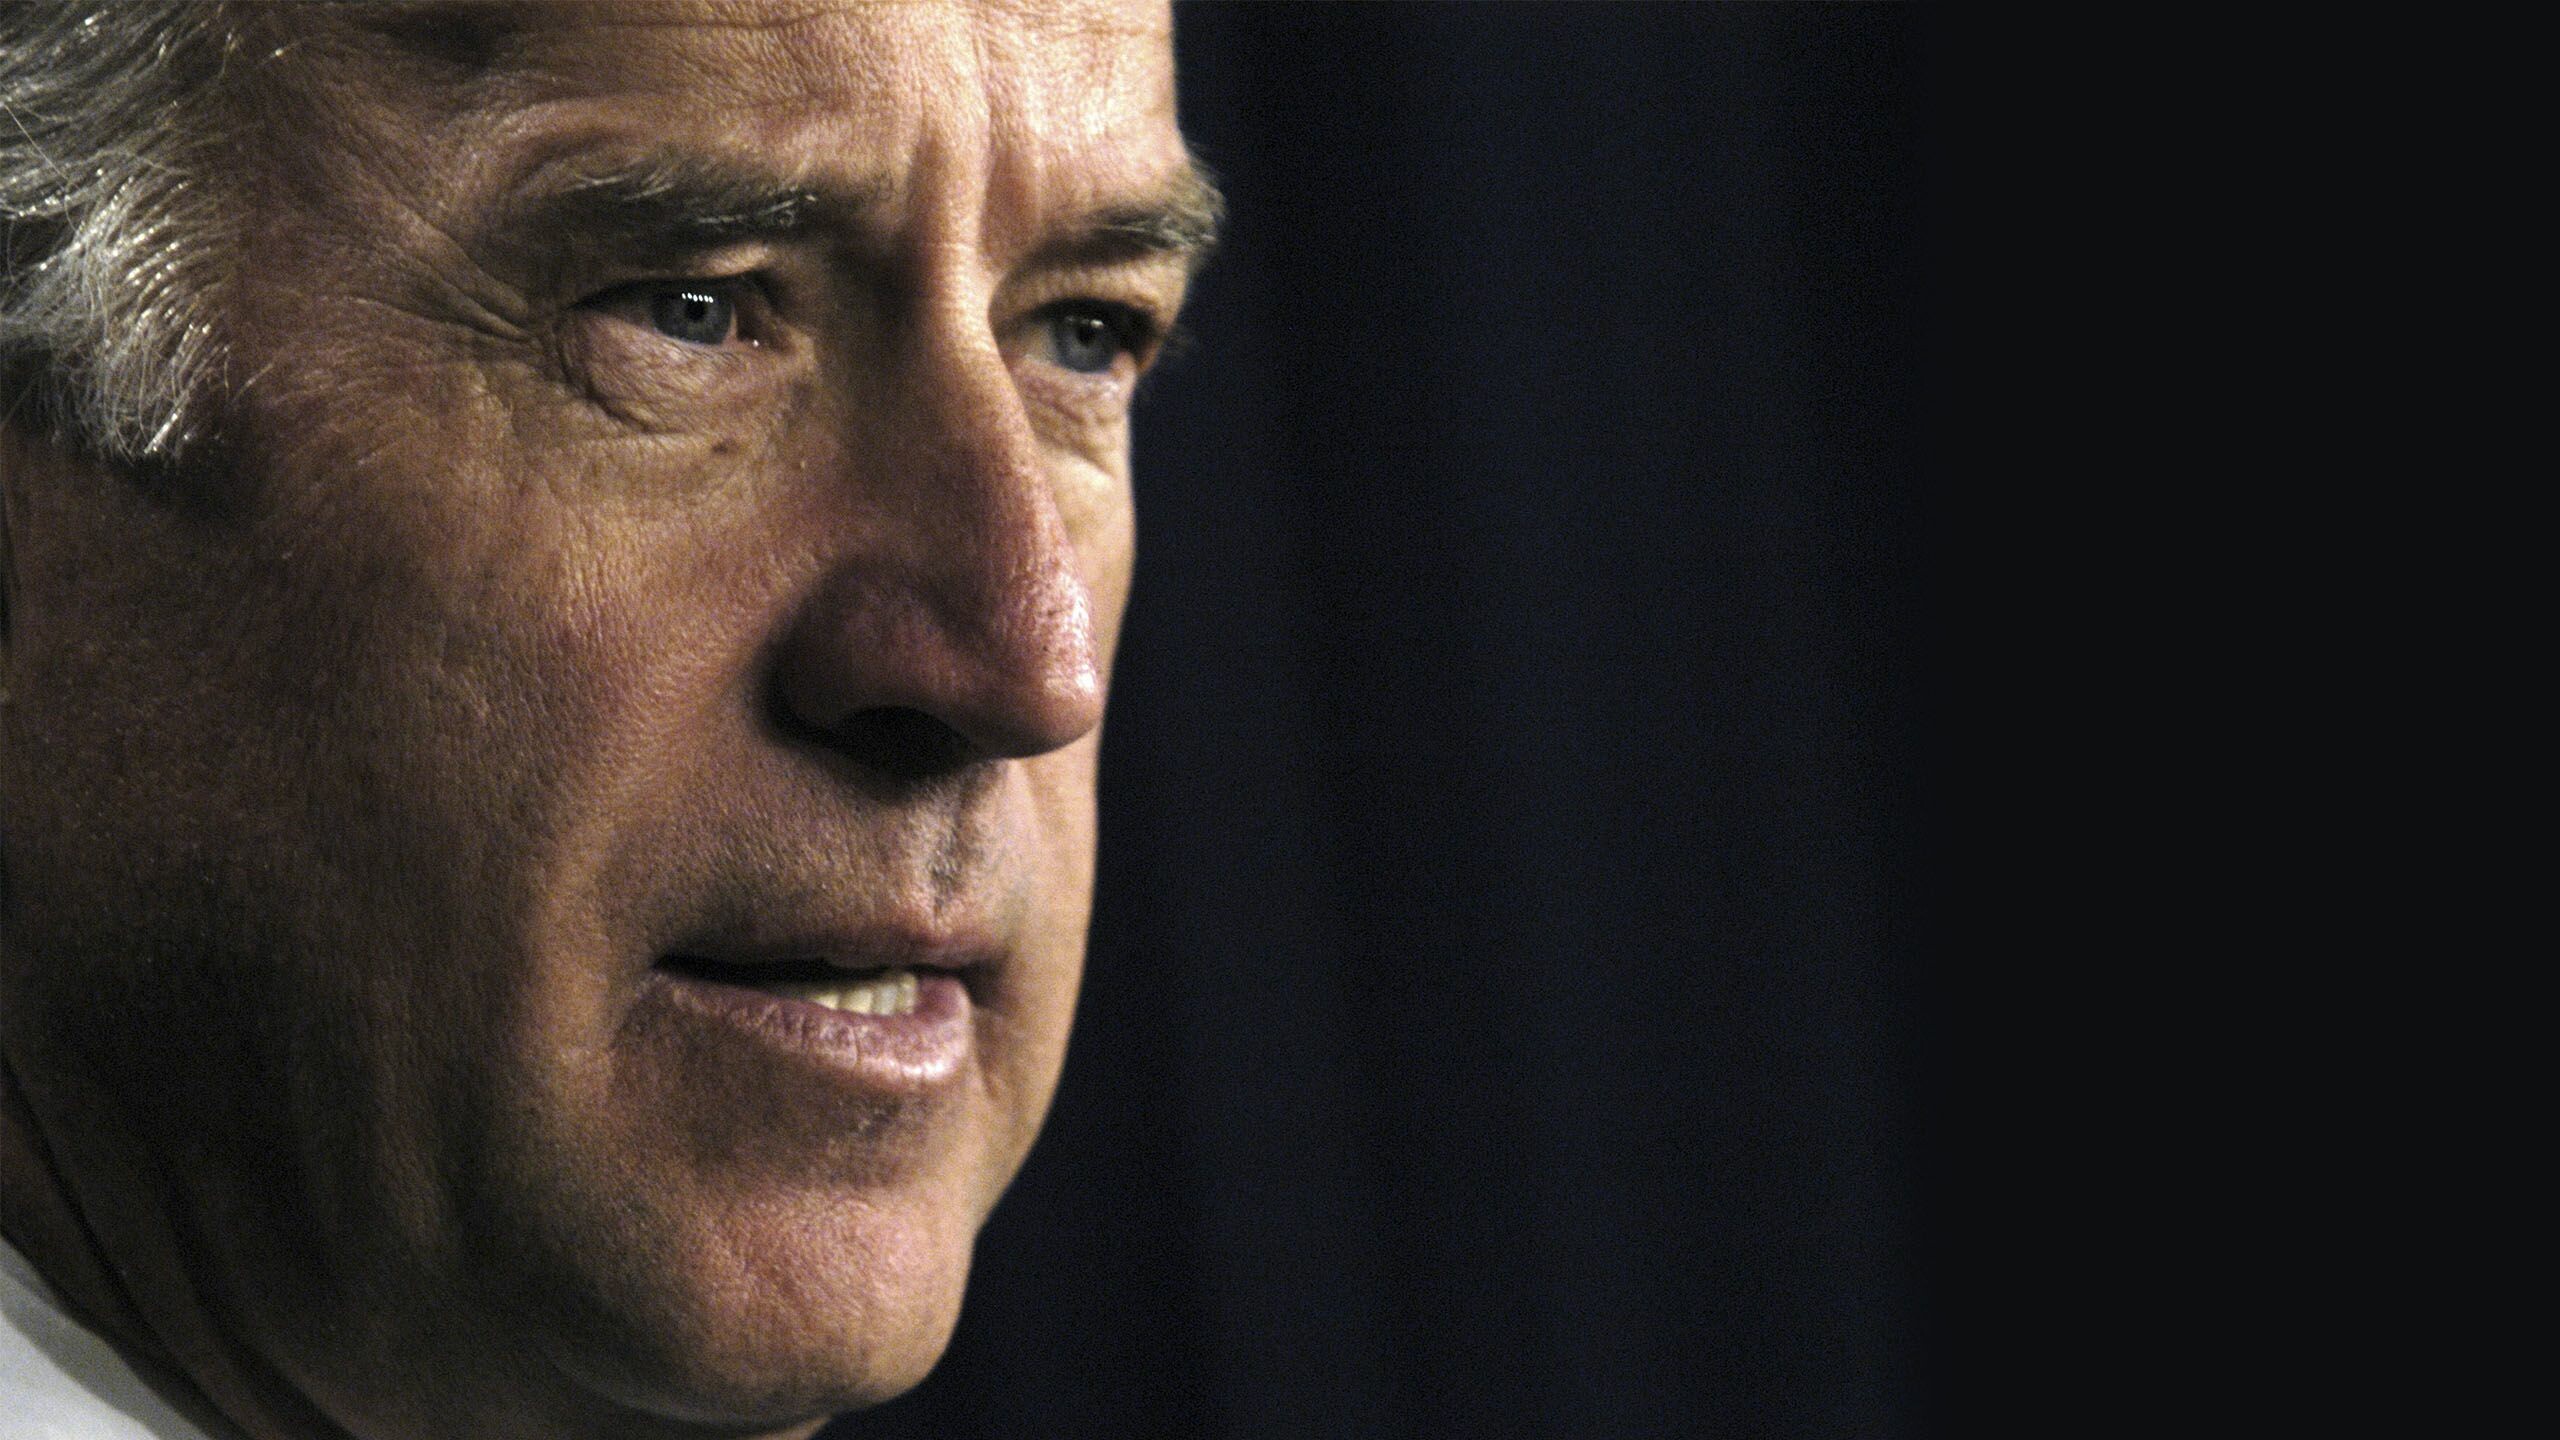 Joe Biden: Represented Delaware for 36 years in the U.S. Senate before becoming the 47th Vice President of the United States. 2560x1440 HD Wallpaper.